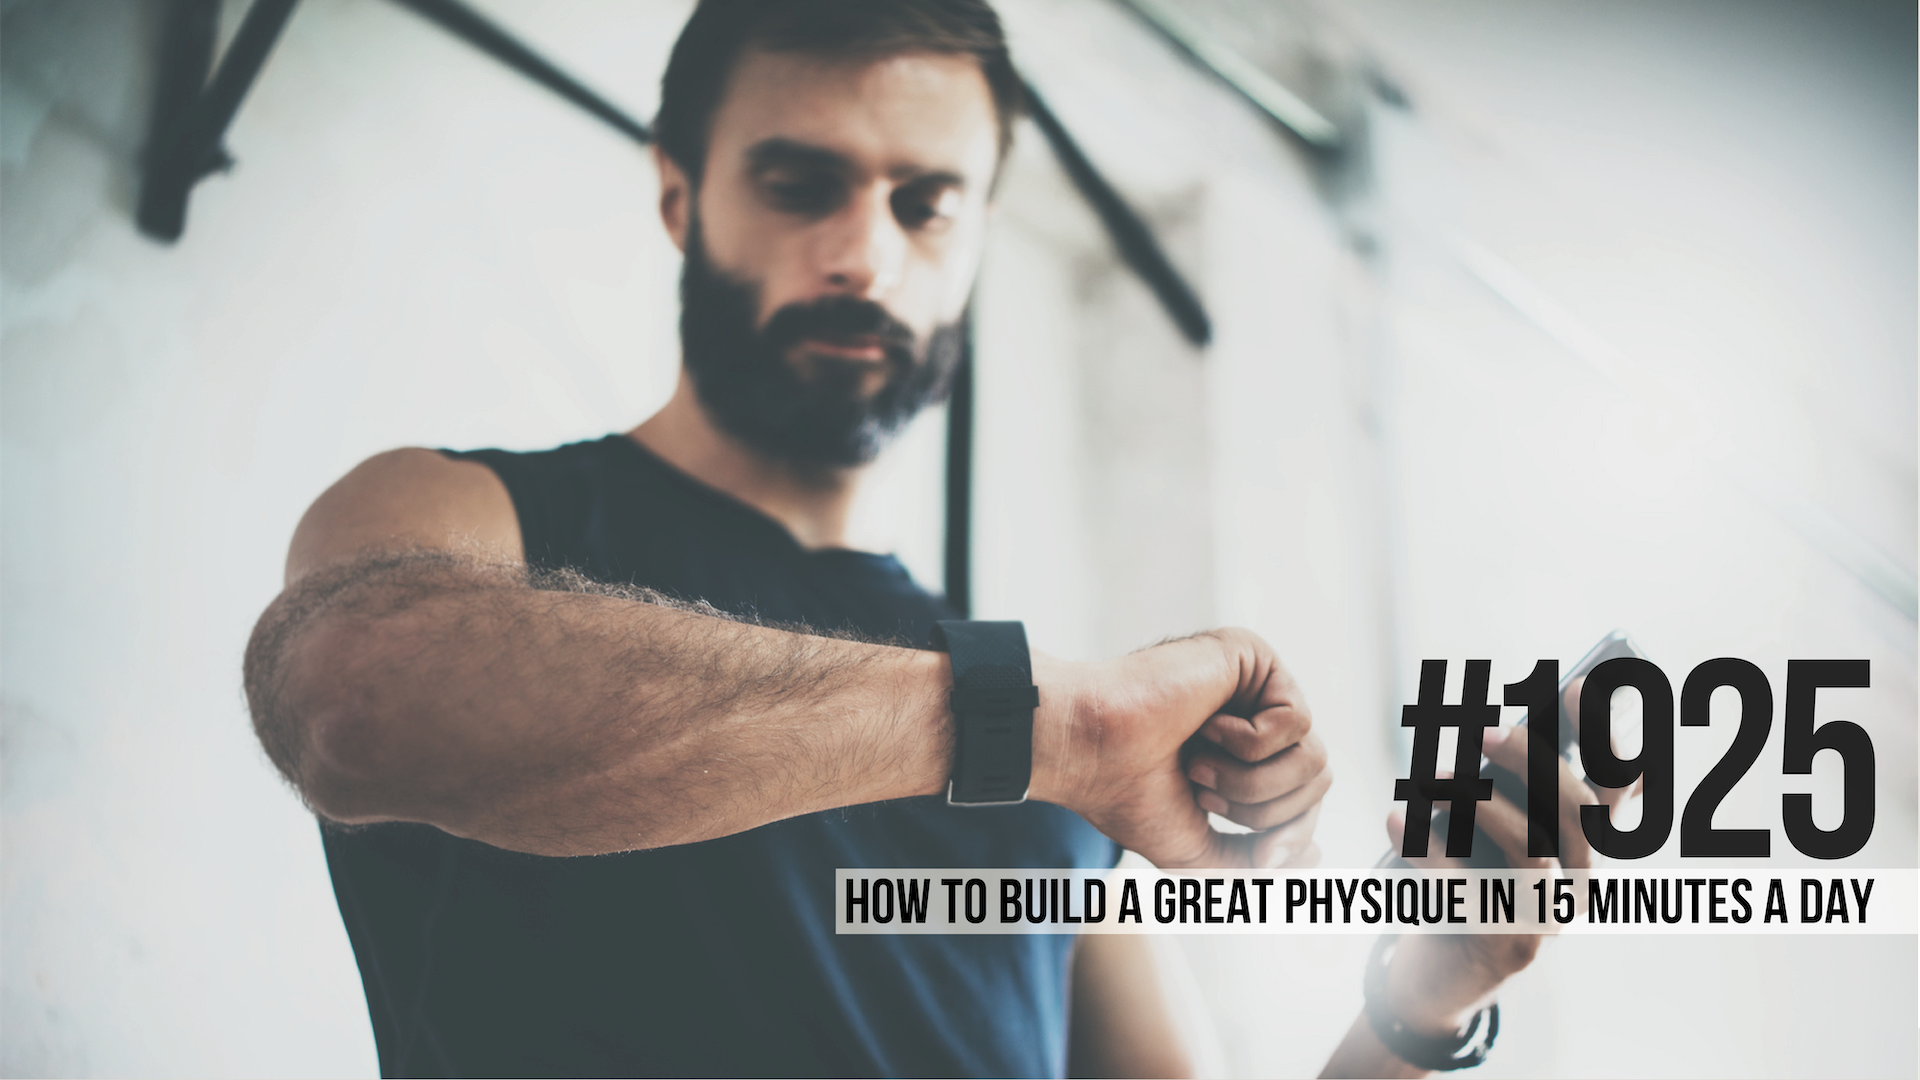 1925: How to Build a Great Physique in 15 Minutes a Day